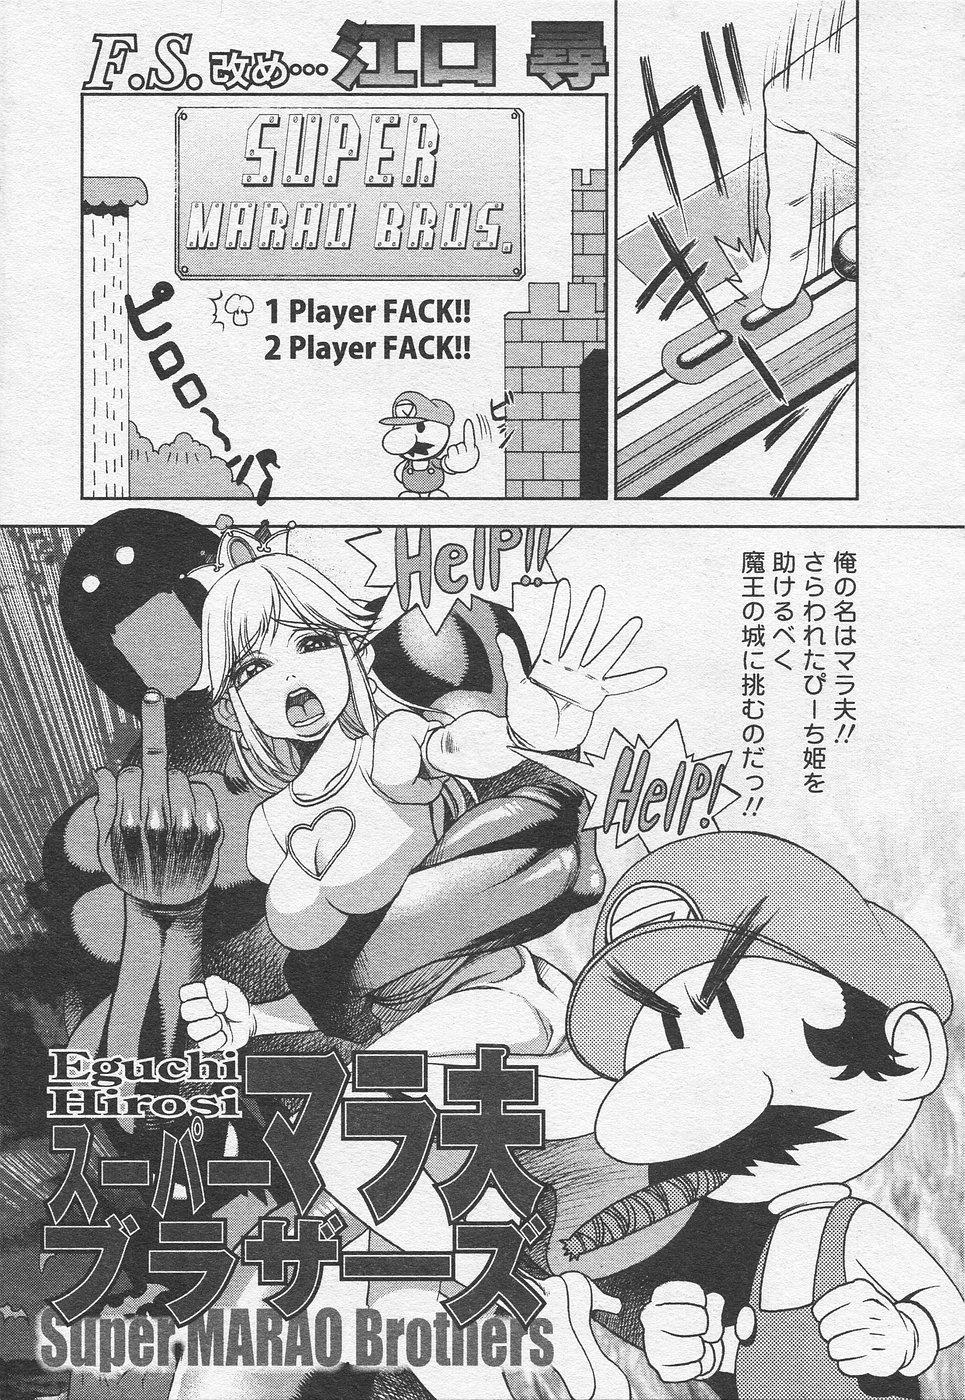 Small Super Marao Brothers - Super mario brothers Hot Girls Getting Fucked - Page 1